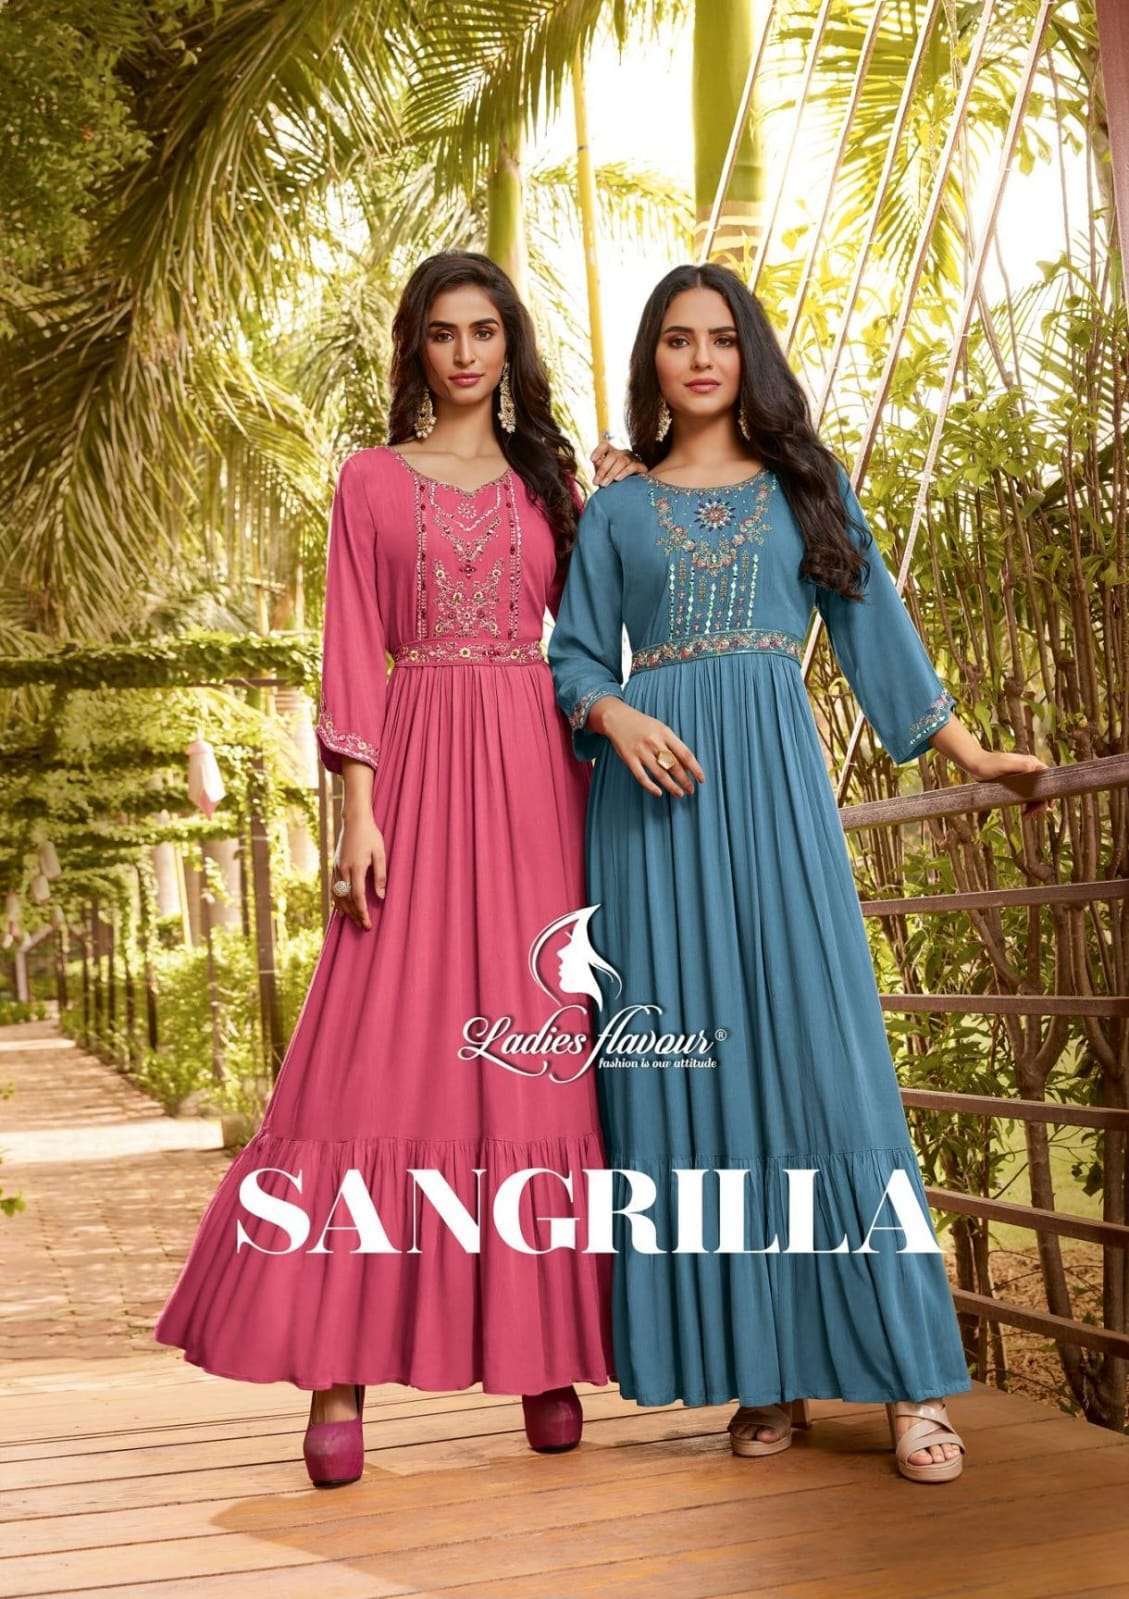 Find Rayon Gown Kurti With Embroidery dupatta set by Pooja Trends near me |  Sanganer Bazar, Jaipur, Rajasthan | Anar B2B Business App